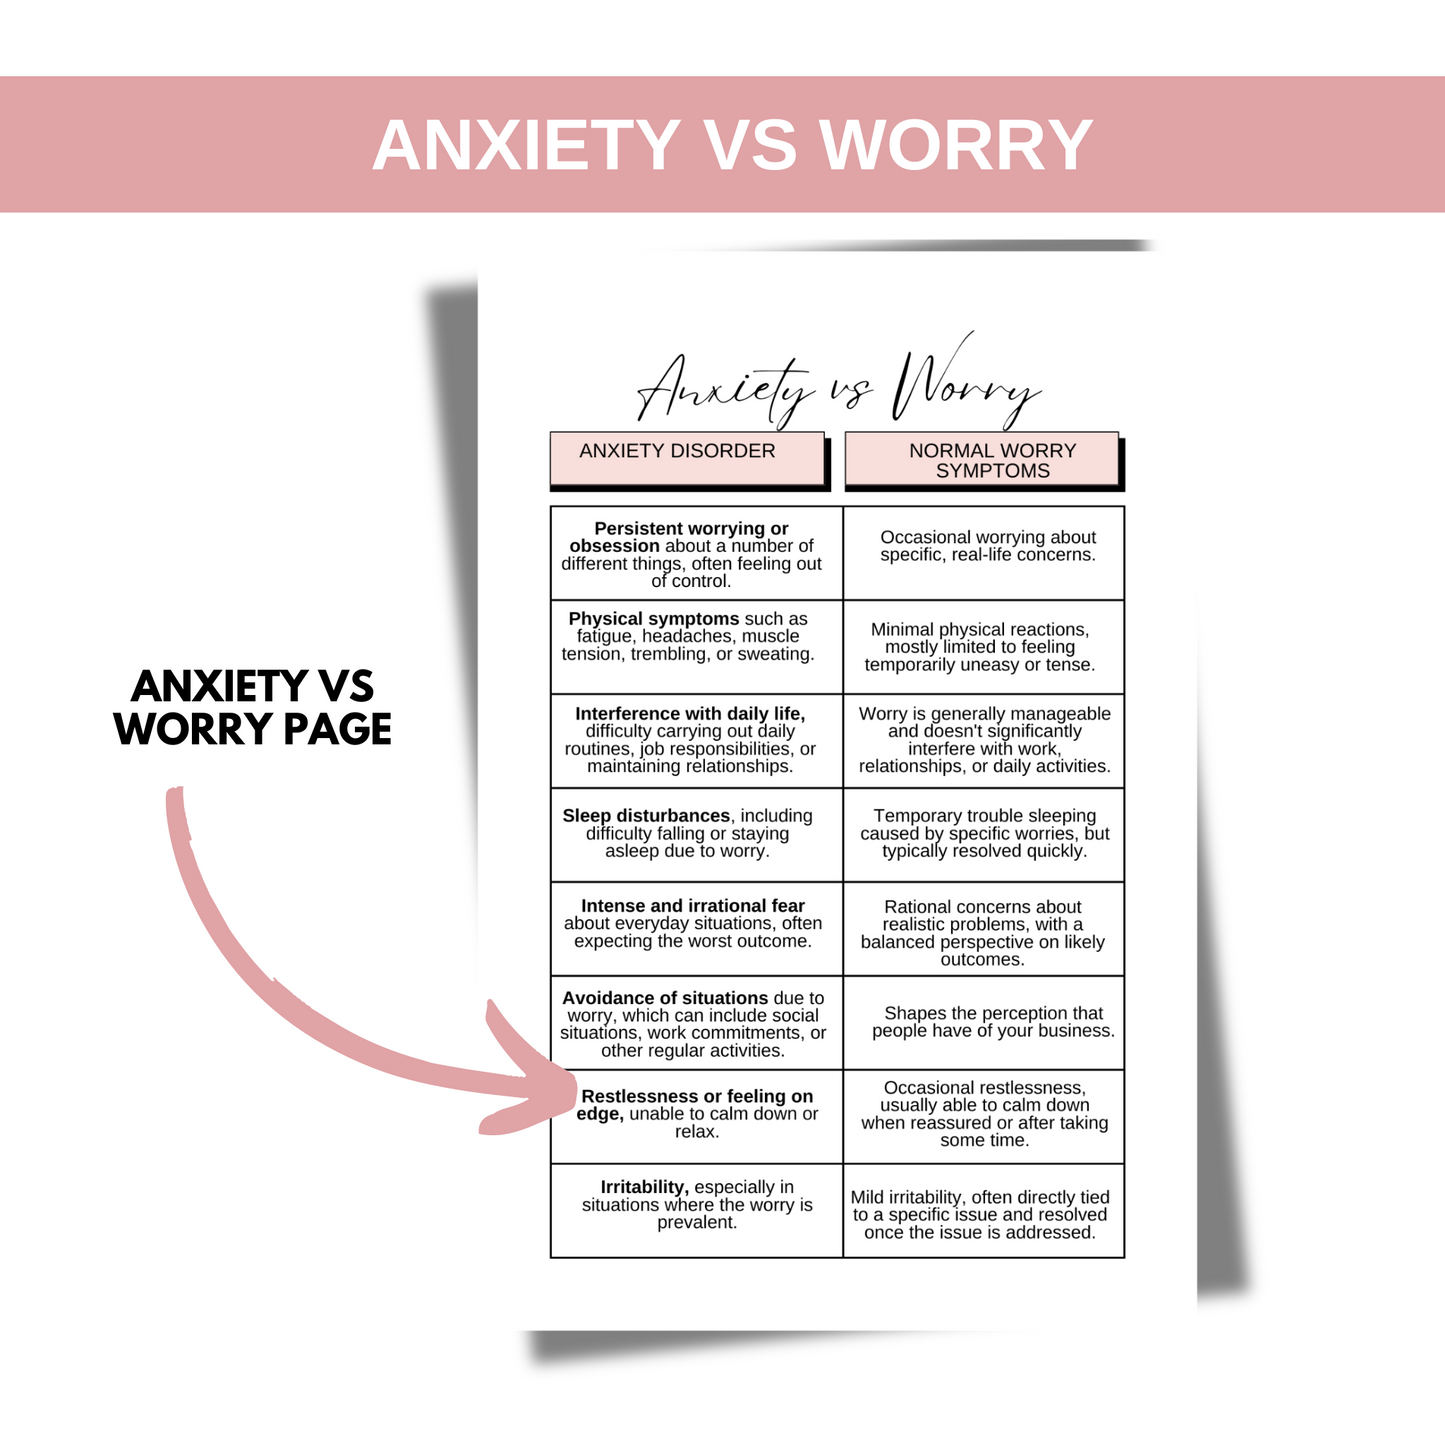 Anxiety Go Away Journal for Women